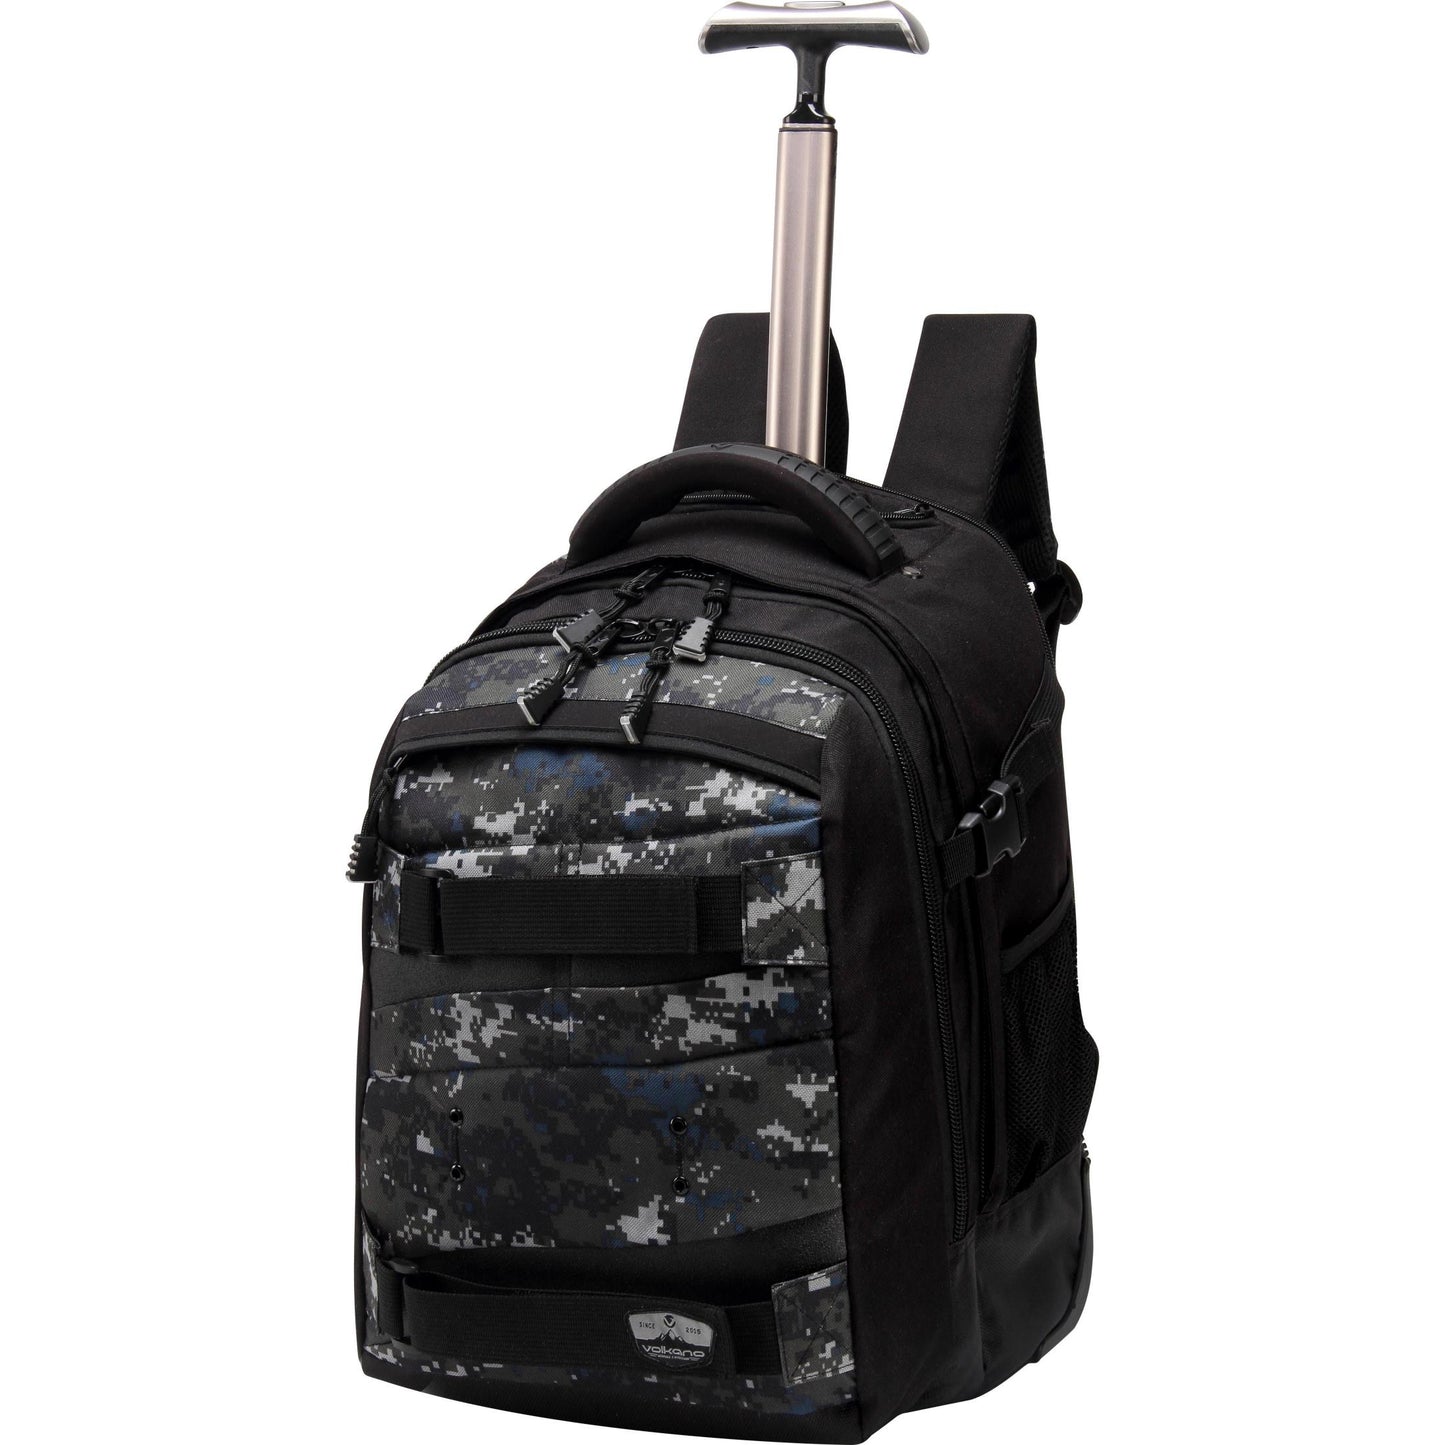 Volkano Trolley Backpack - Bam M Series, Camo Edition